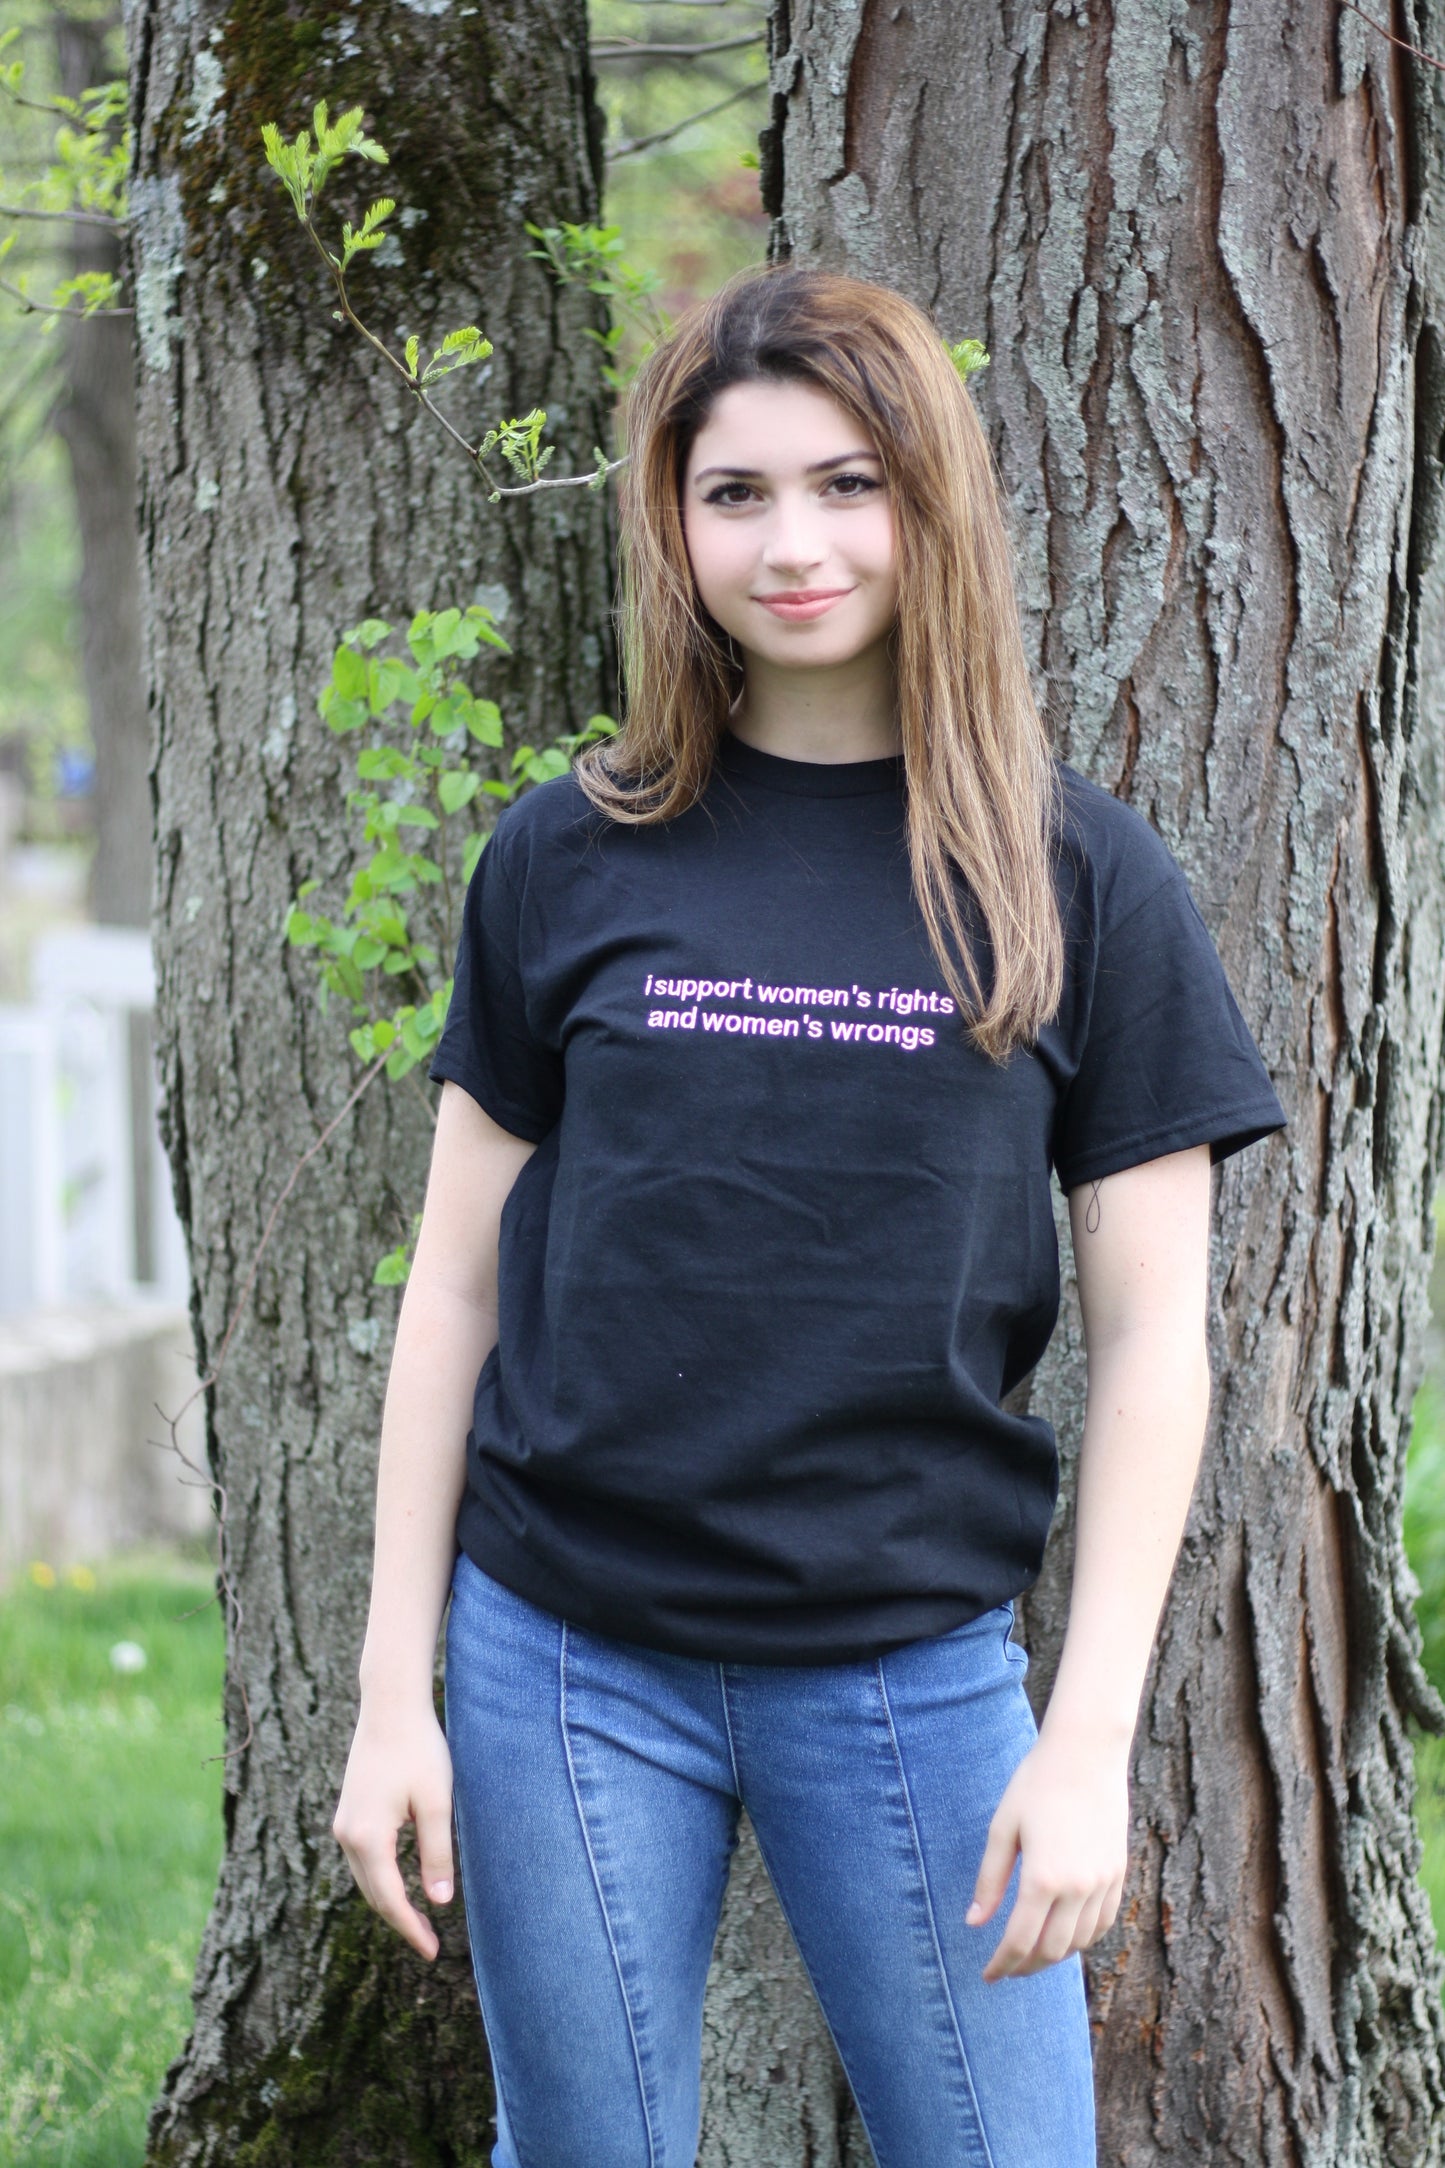 I Support Women's Rights and Wrongs Embroidered T-Shirt or Sweatshirt